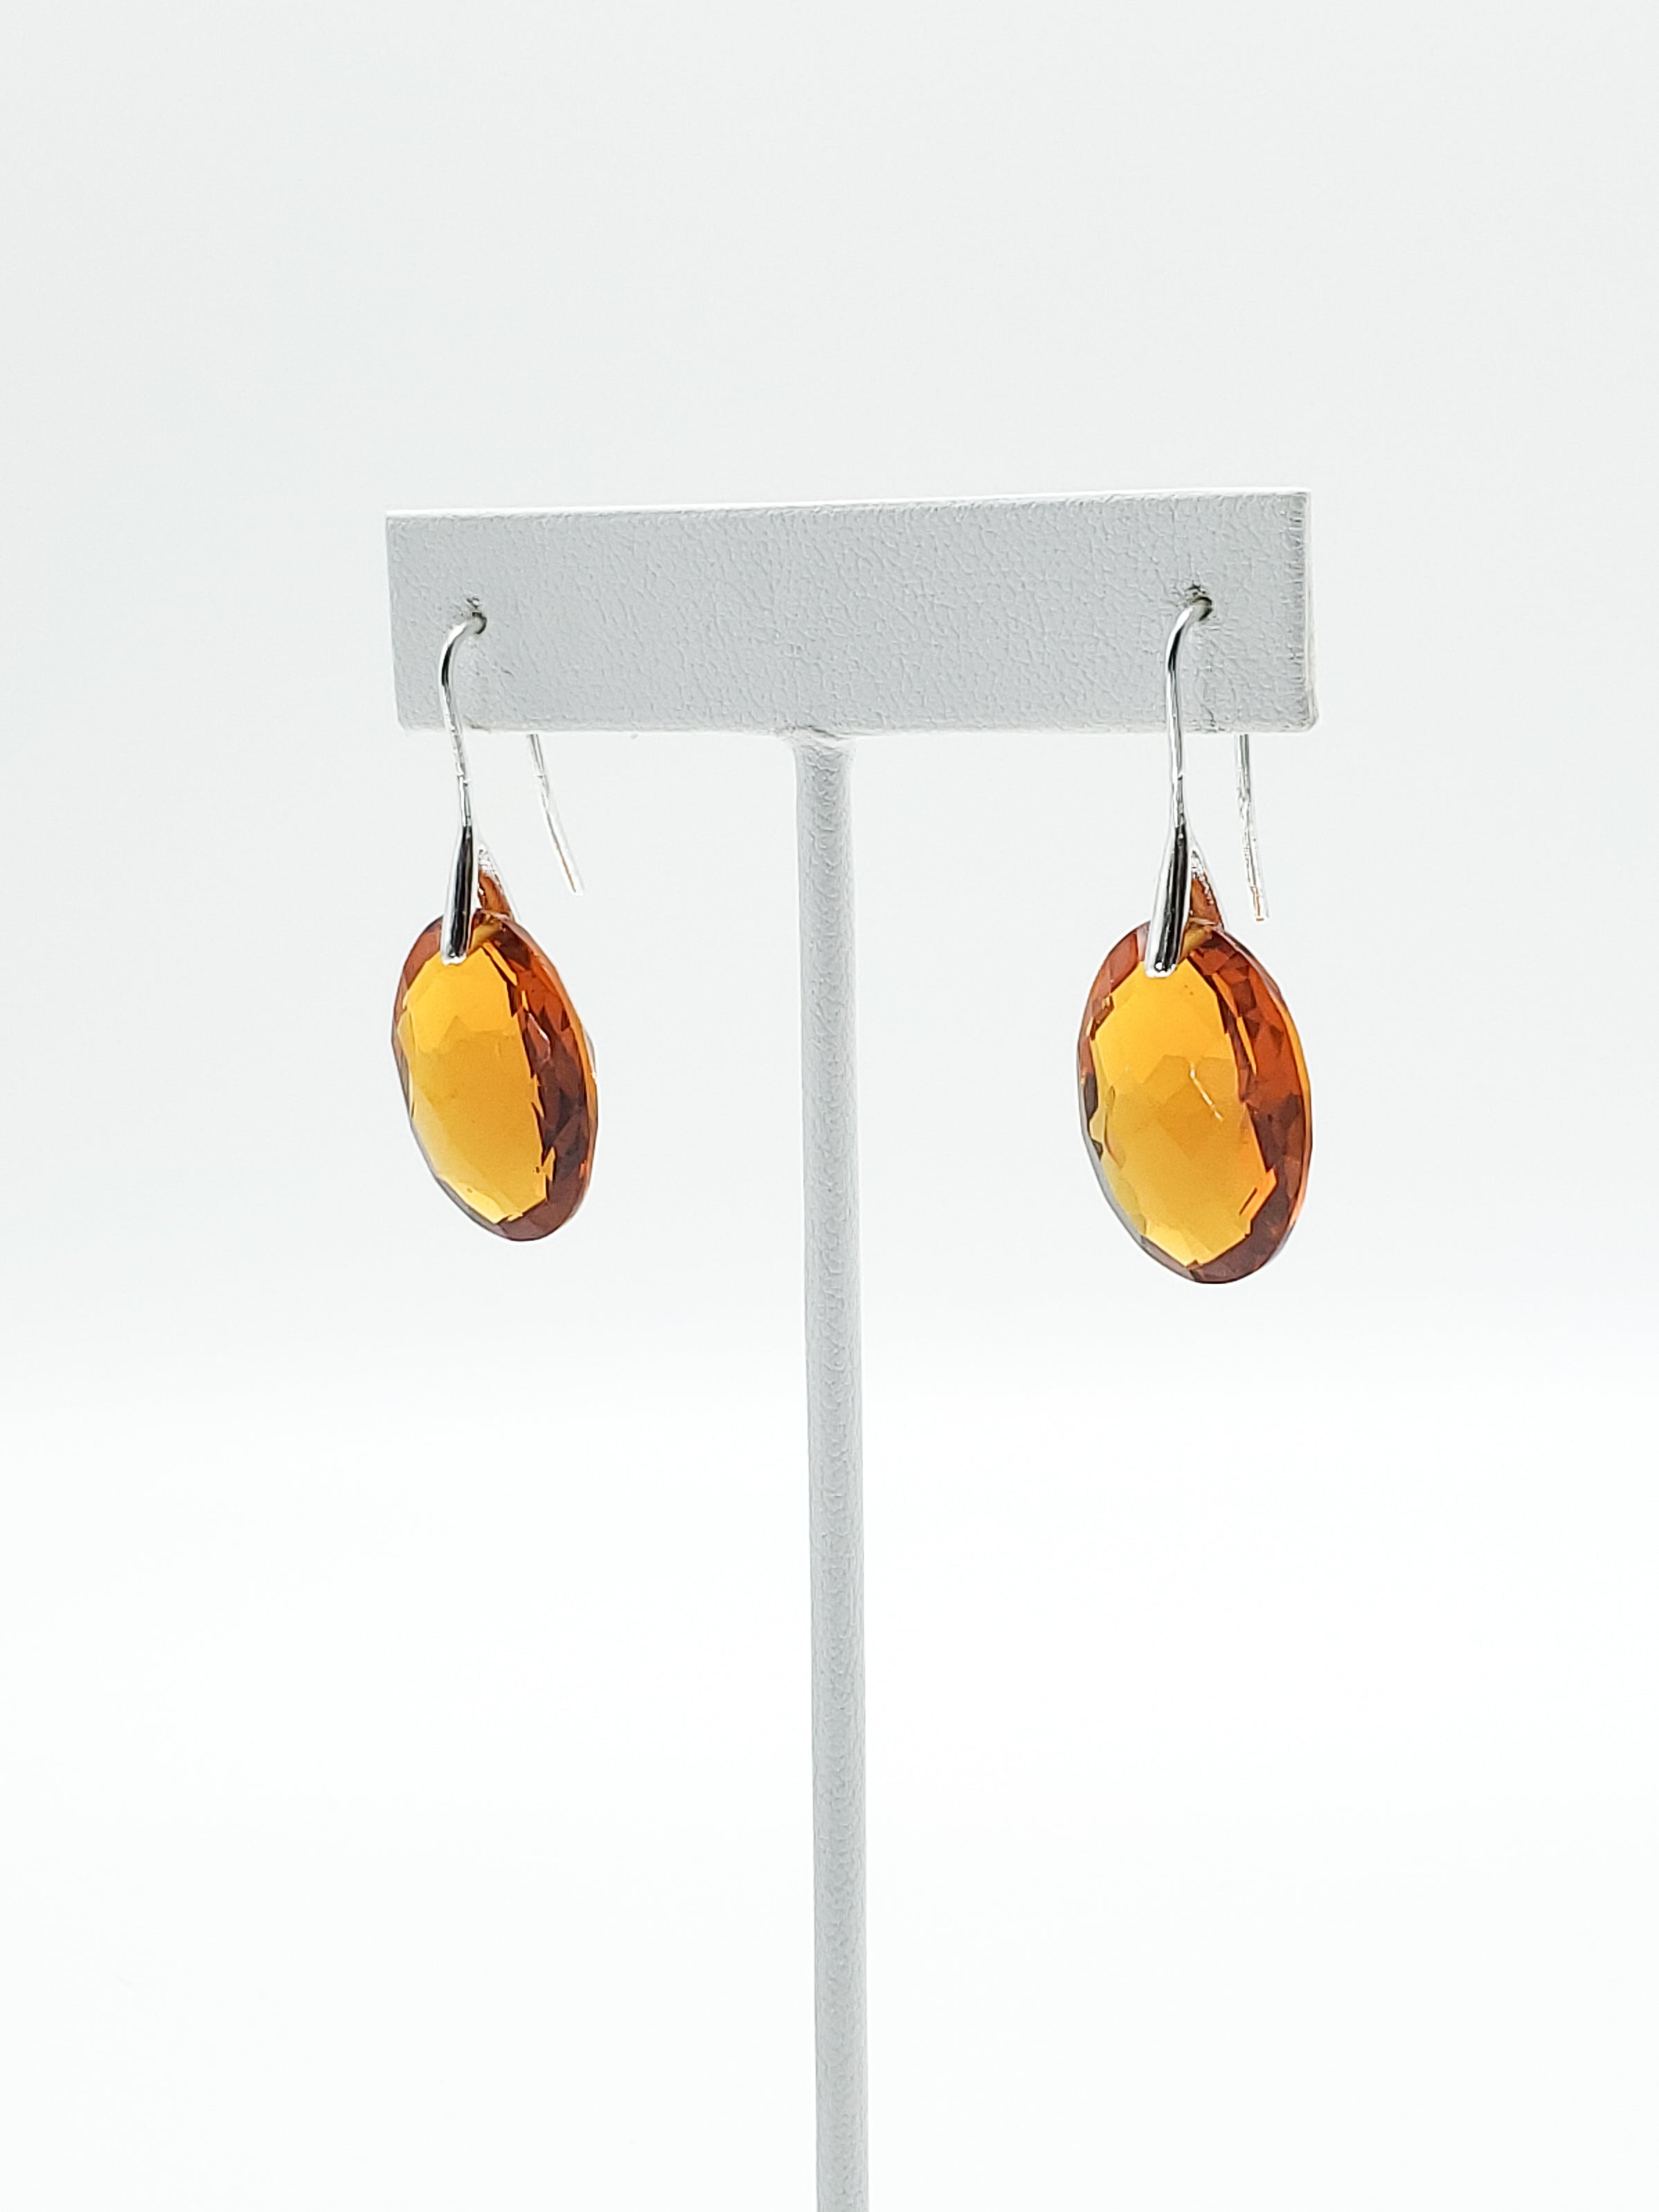 Checker Cut Oval Hydro Citrine Earrings on Sterling Silver Ear Wires - The Caffeinated Raven